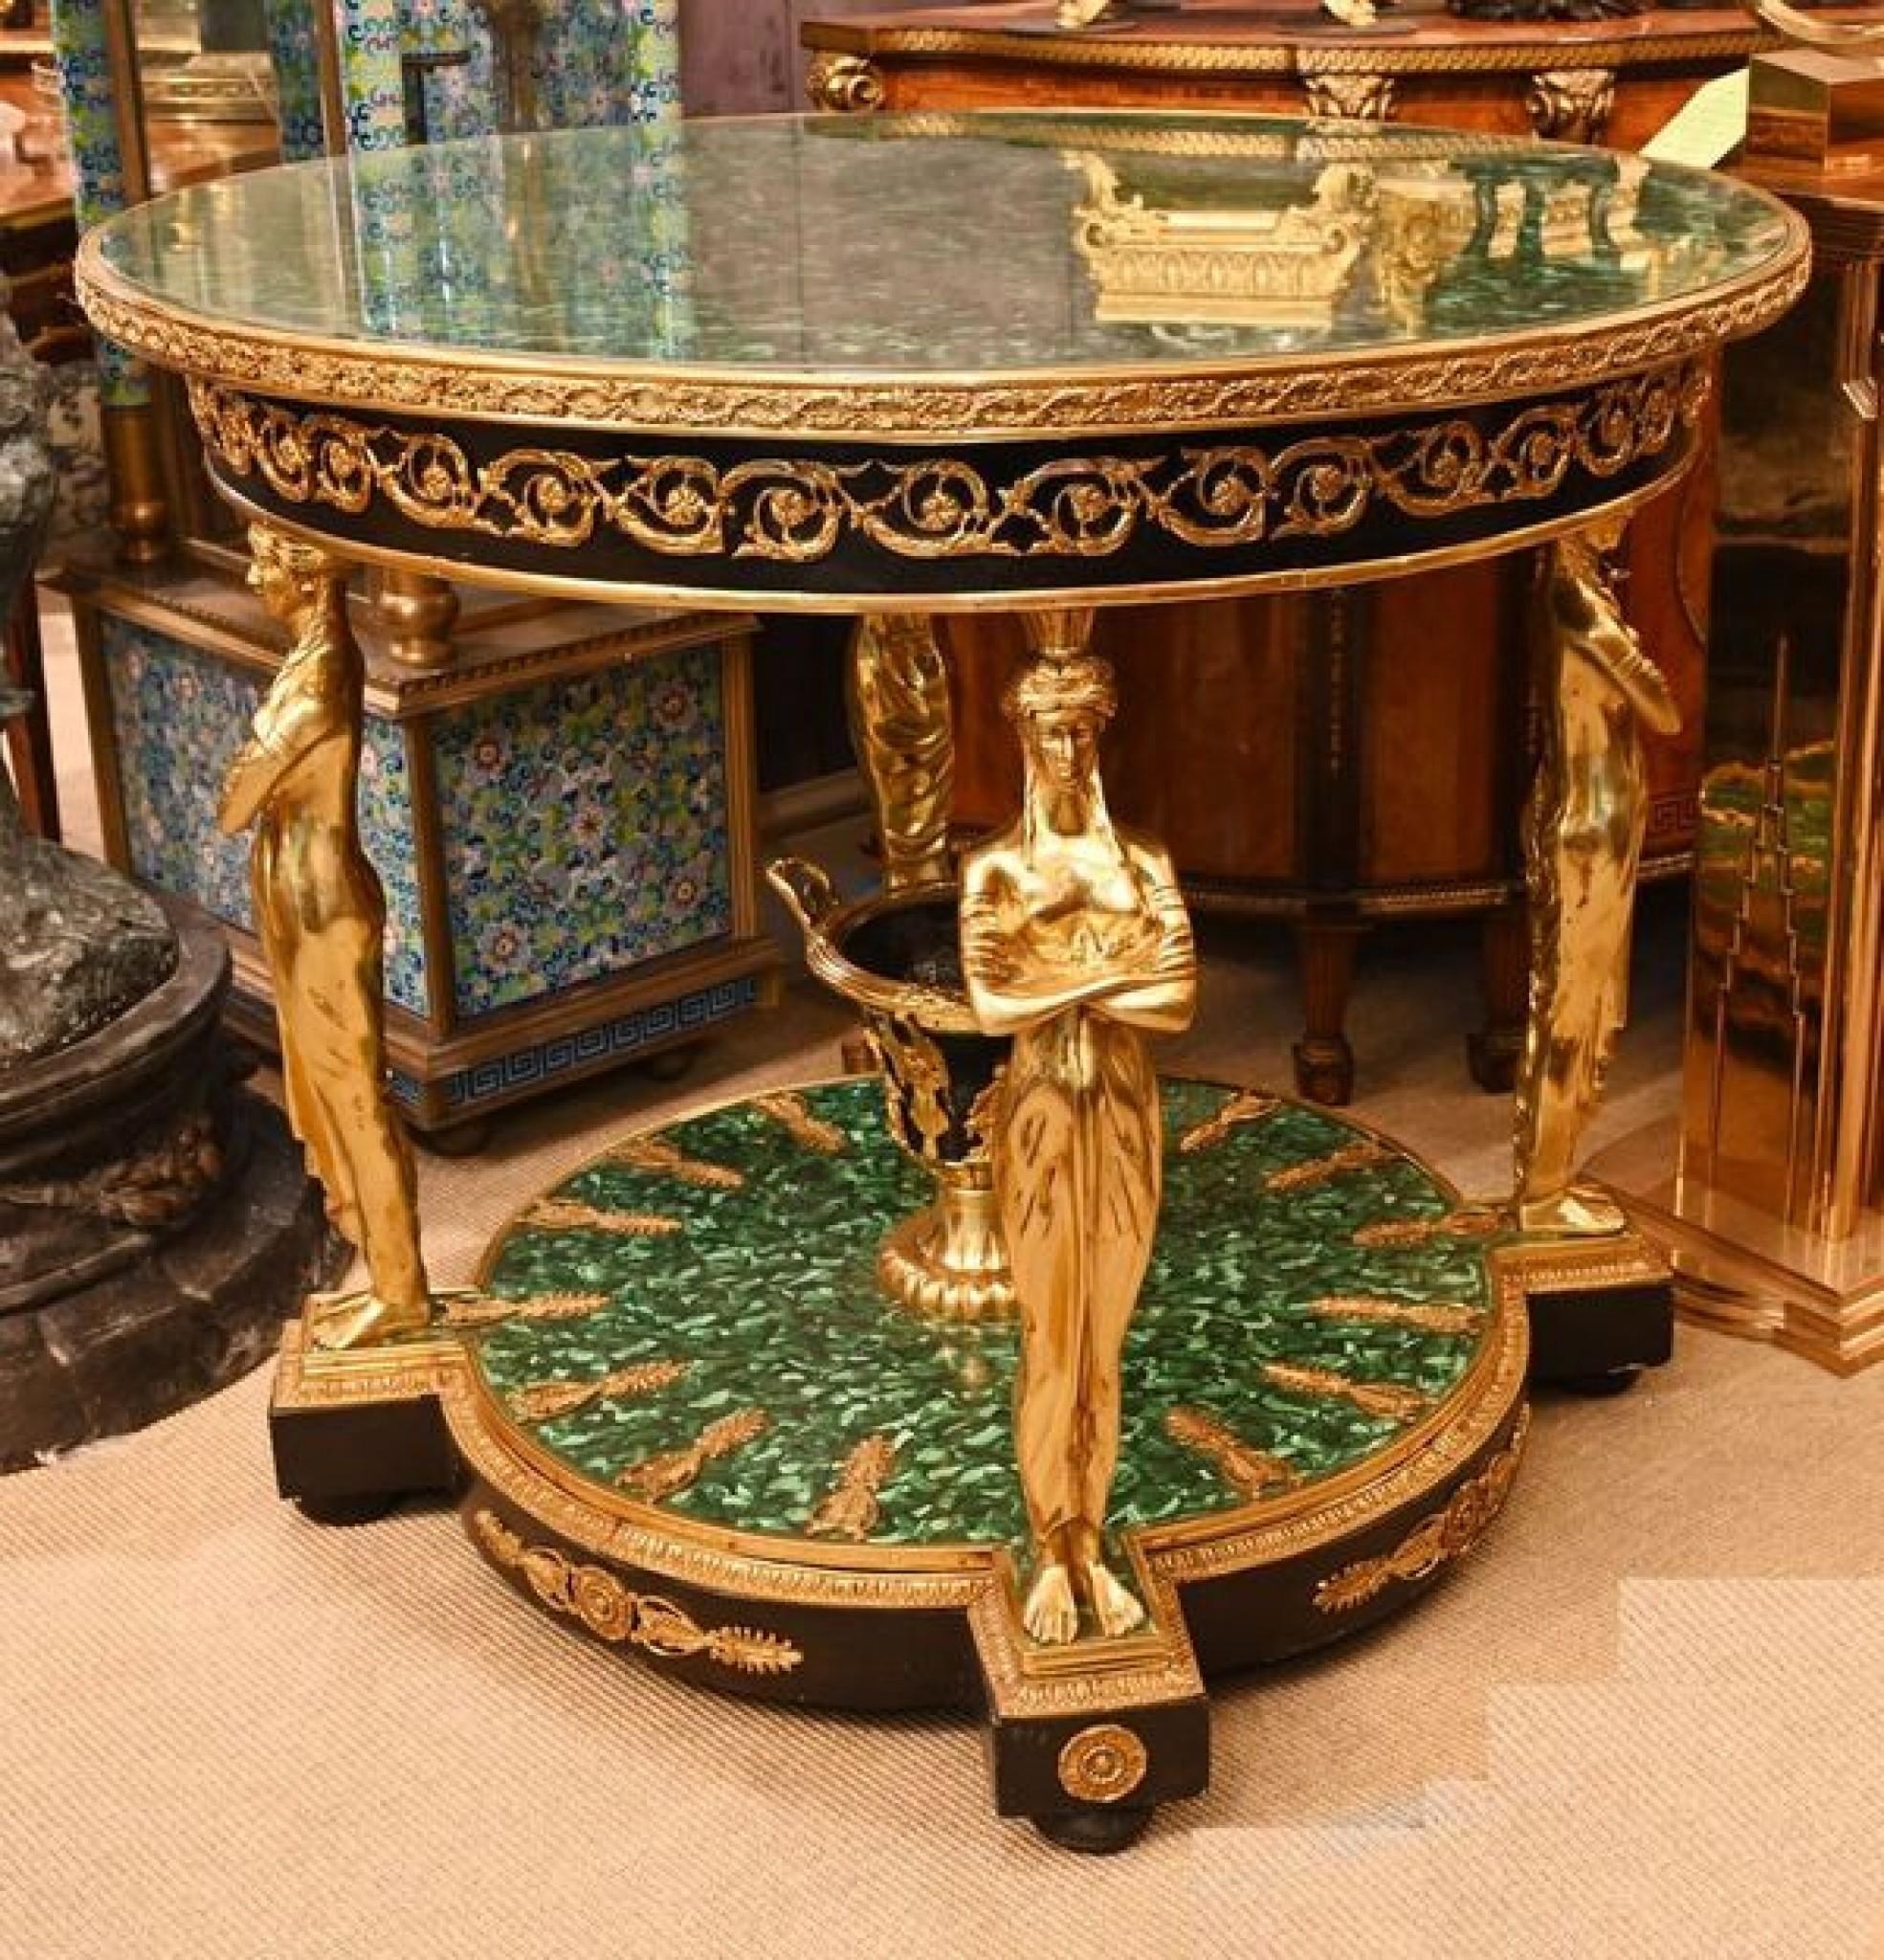 Stunning French Empire table in gilt with malachite base and top
Such a great look to this piece which reeks of style and elegance
The look is very high Empire with all the classical and Greek references
Of course the four table legs are gilt